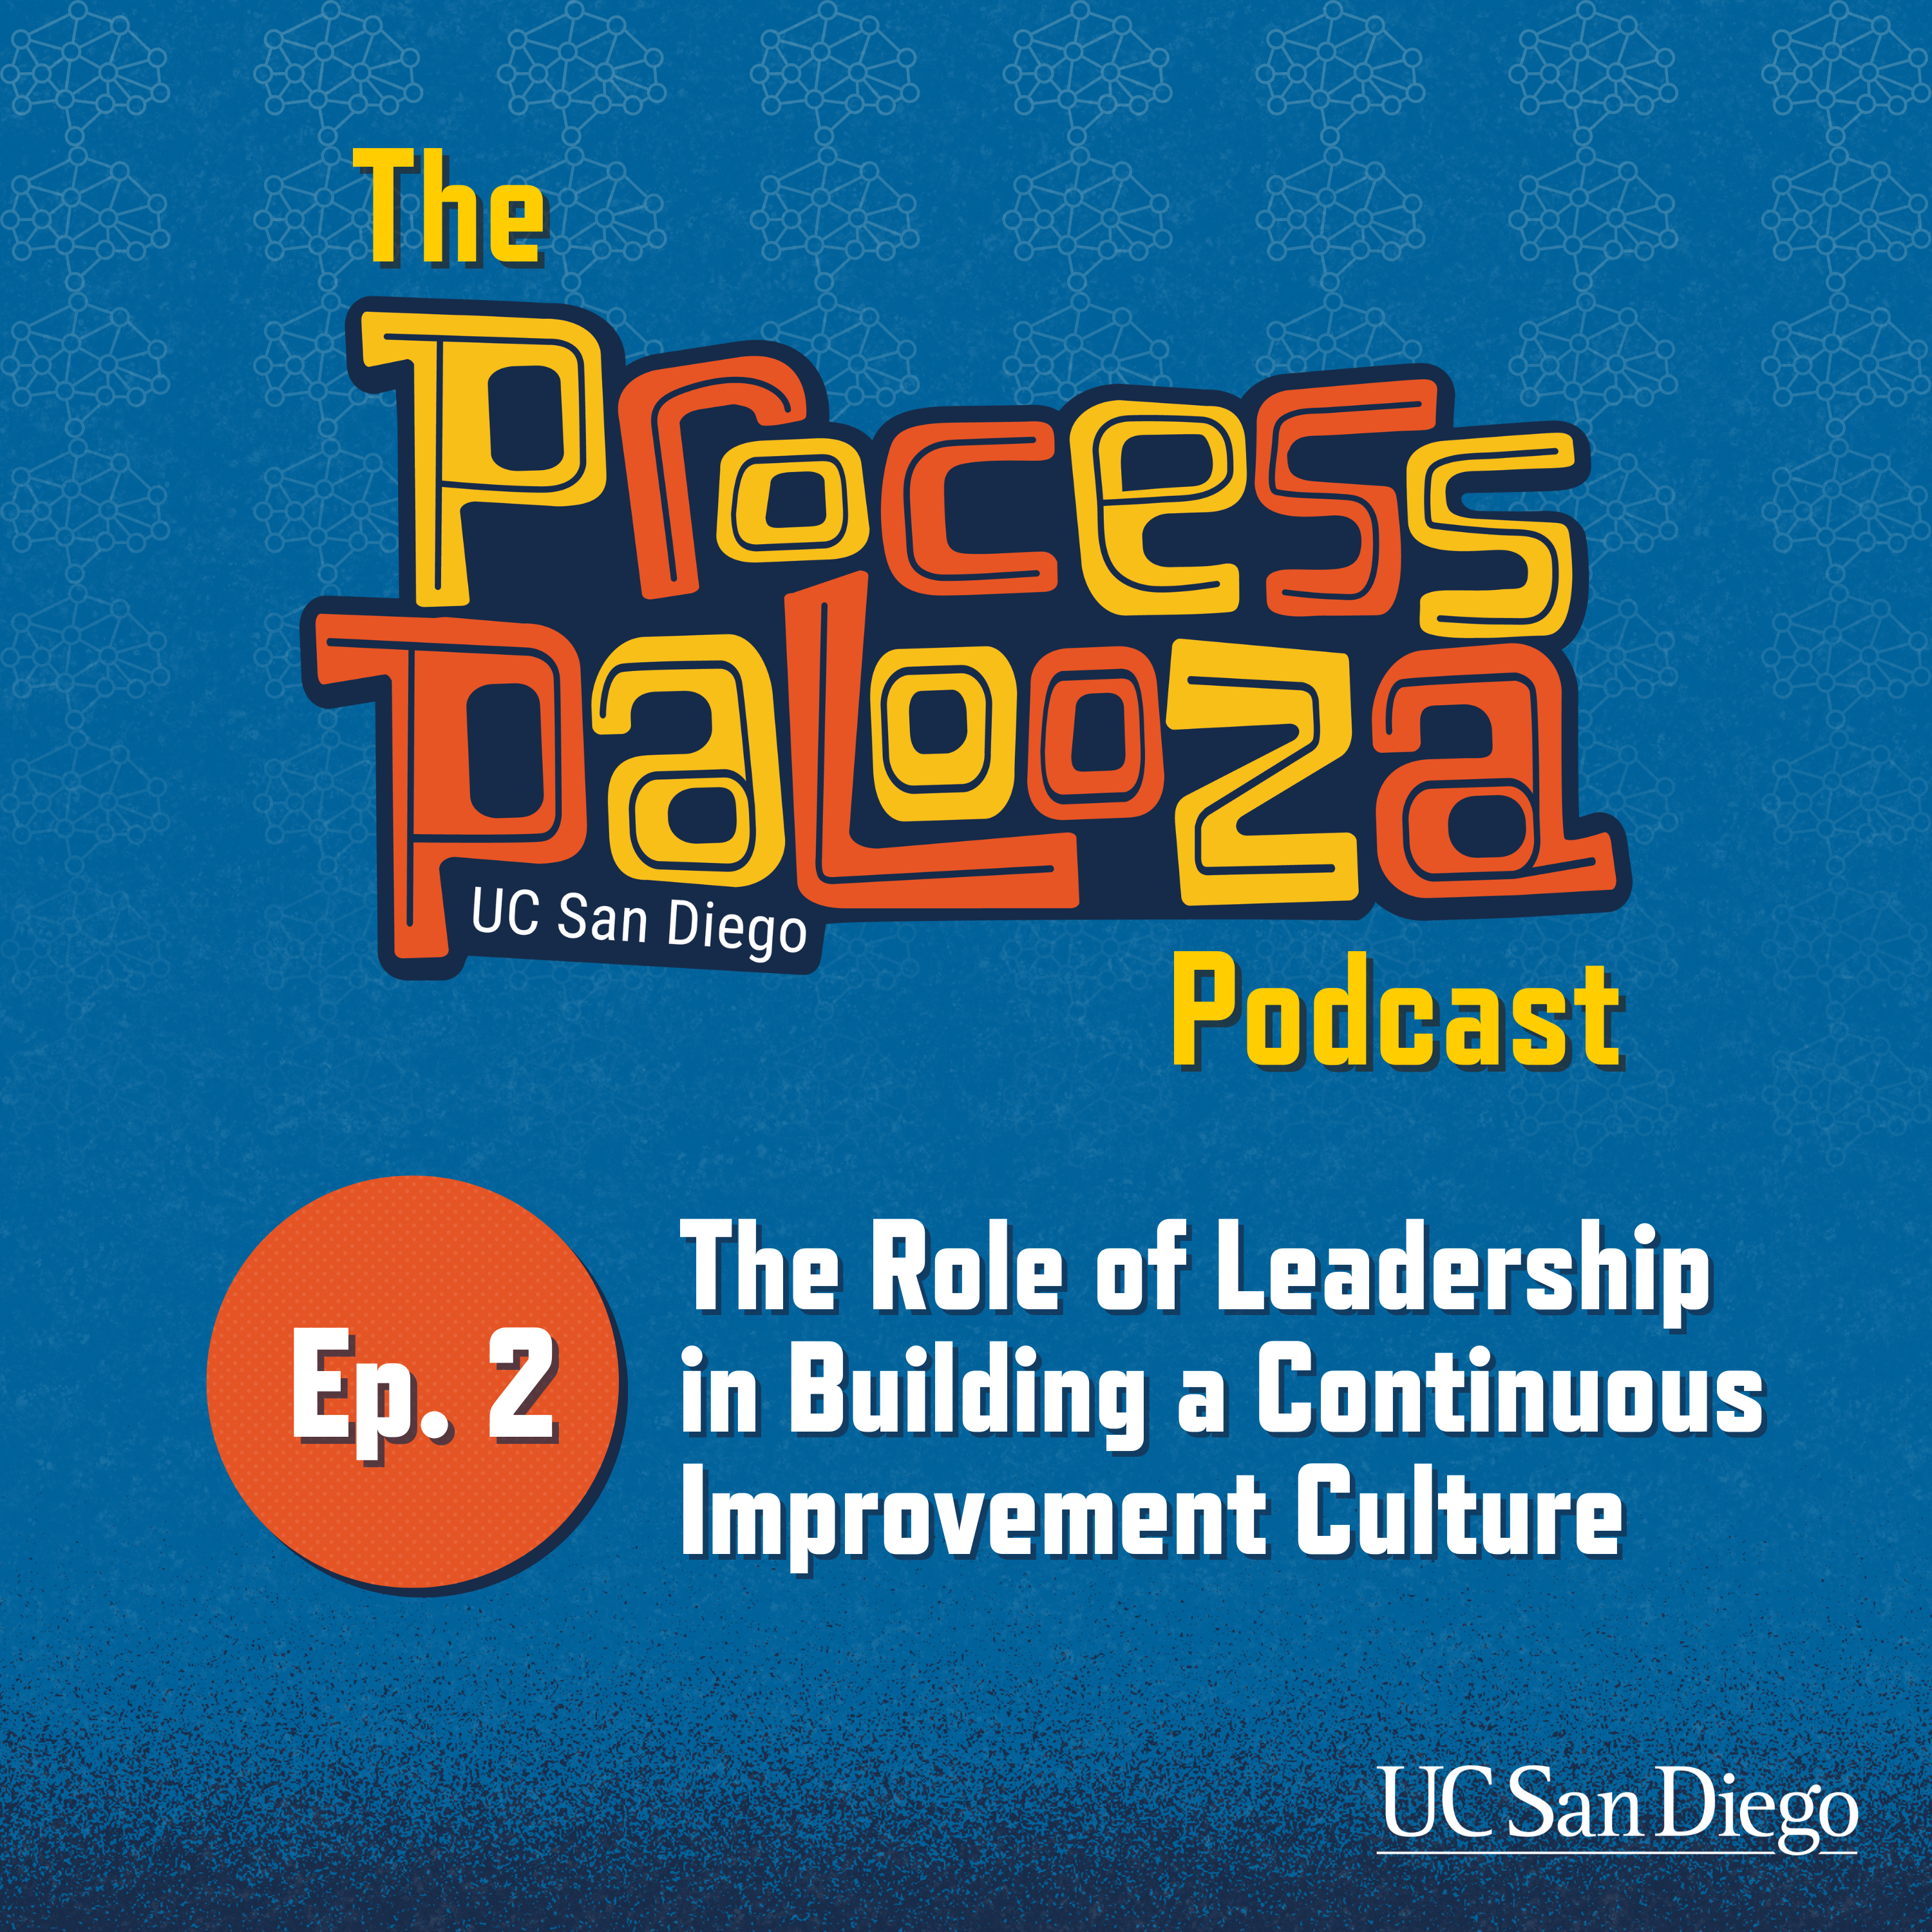 The Process Palooza Podcast - Episode 2: The Role of Leadership in Building a Continuous Improvement Culture